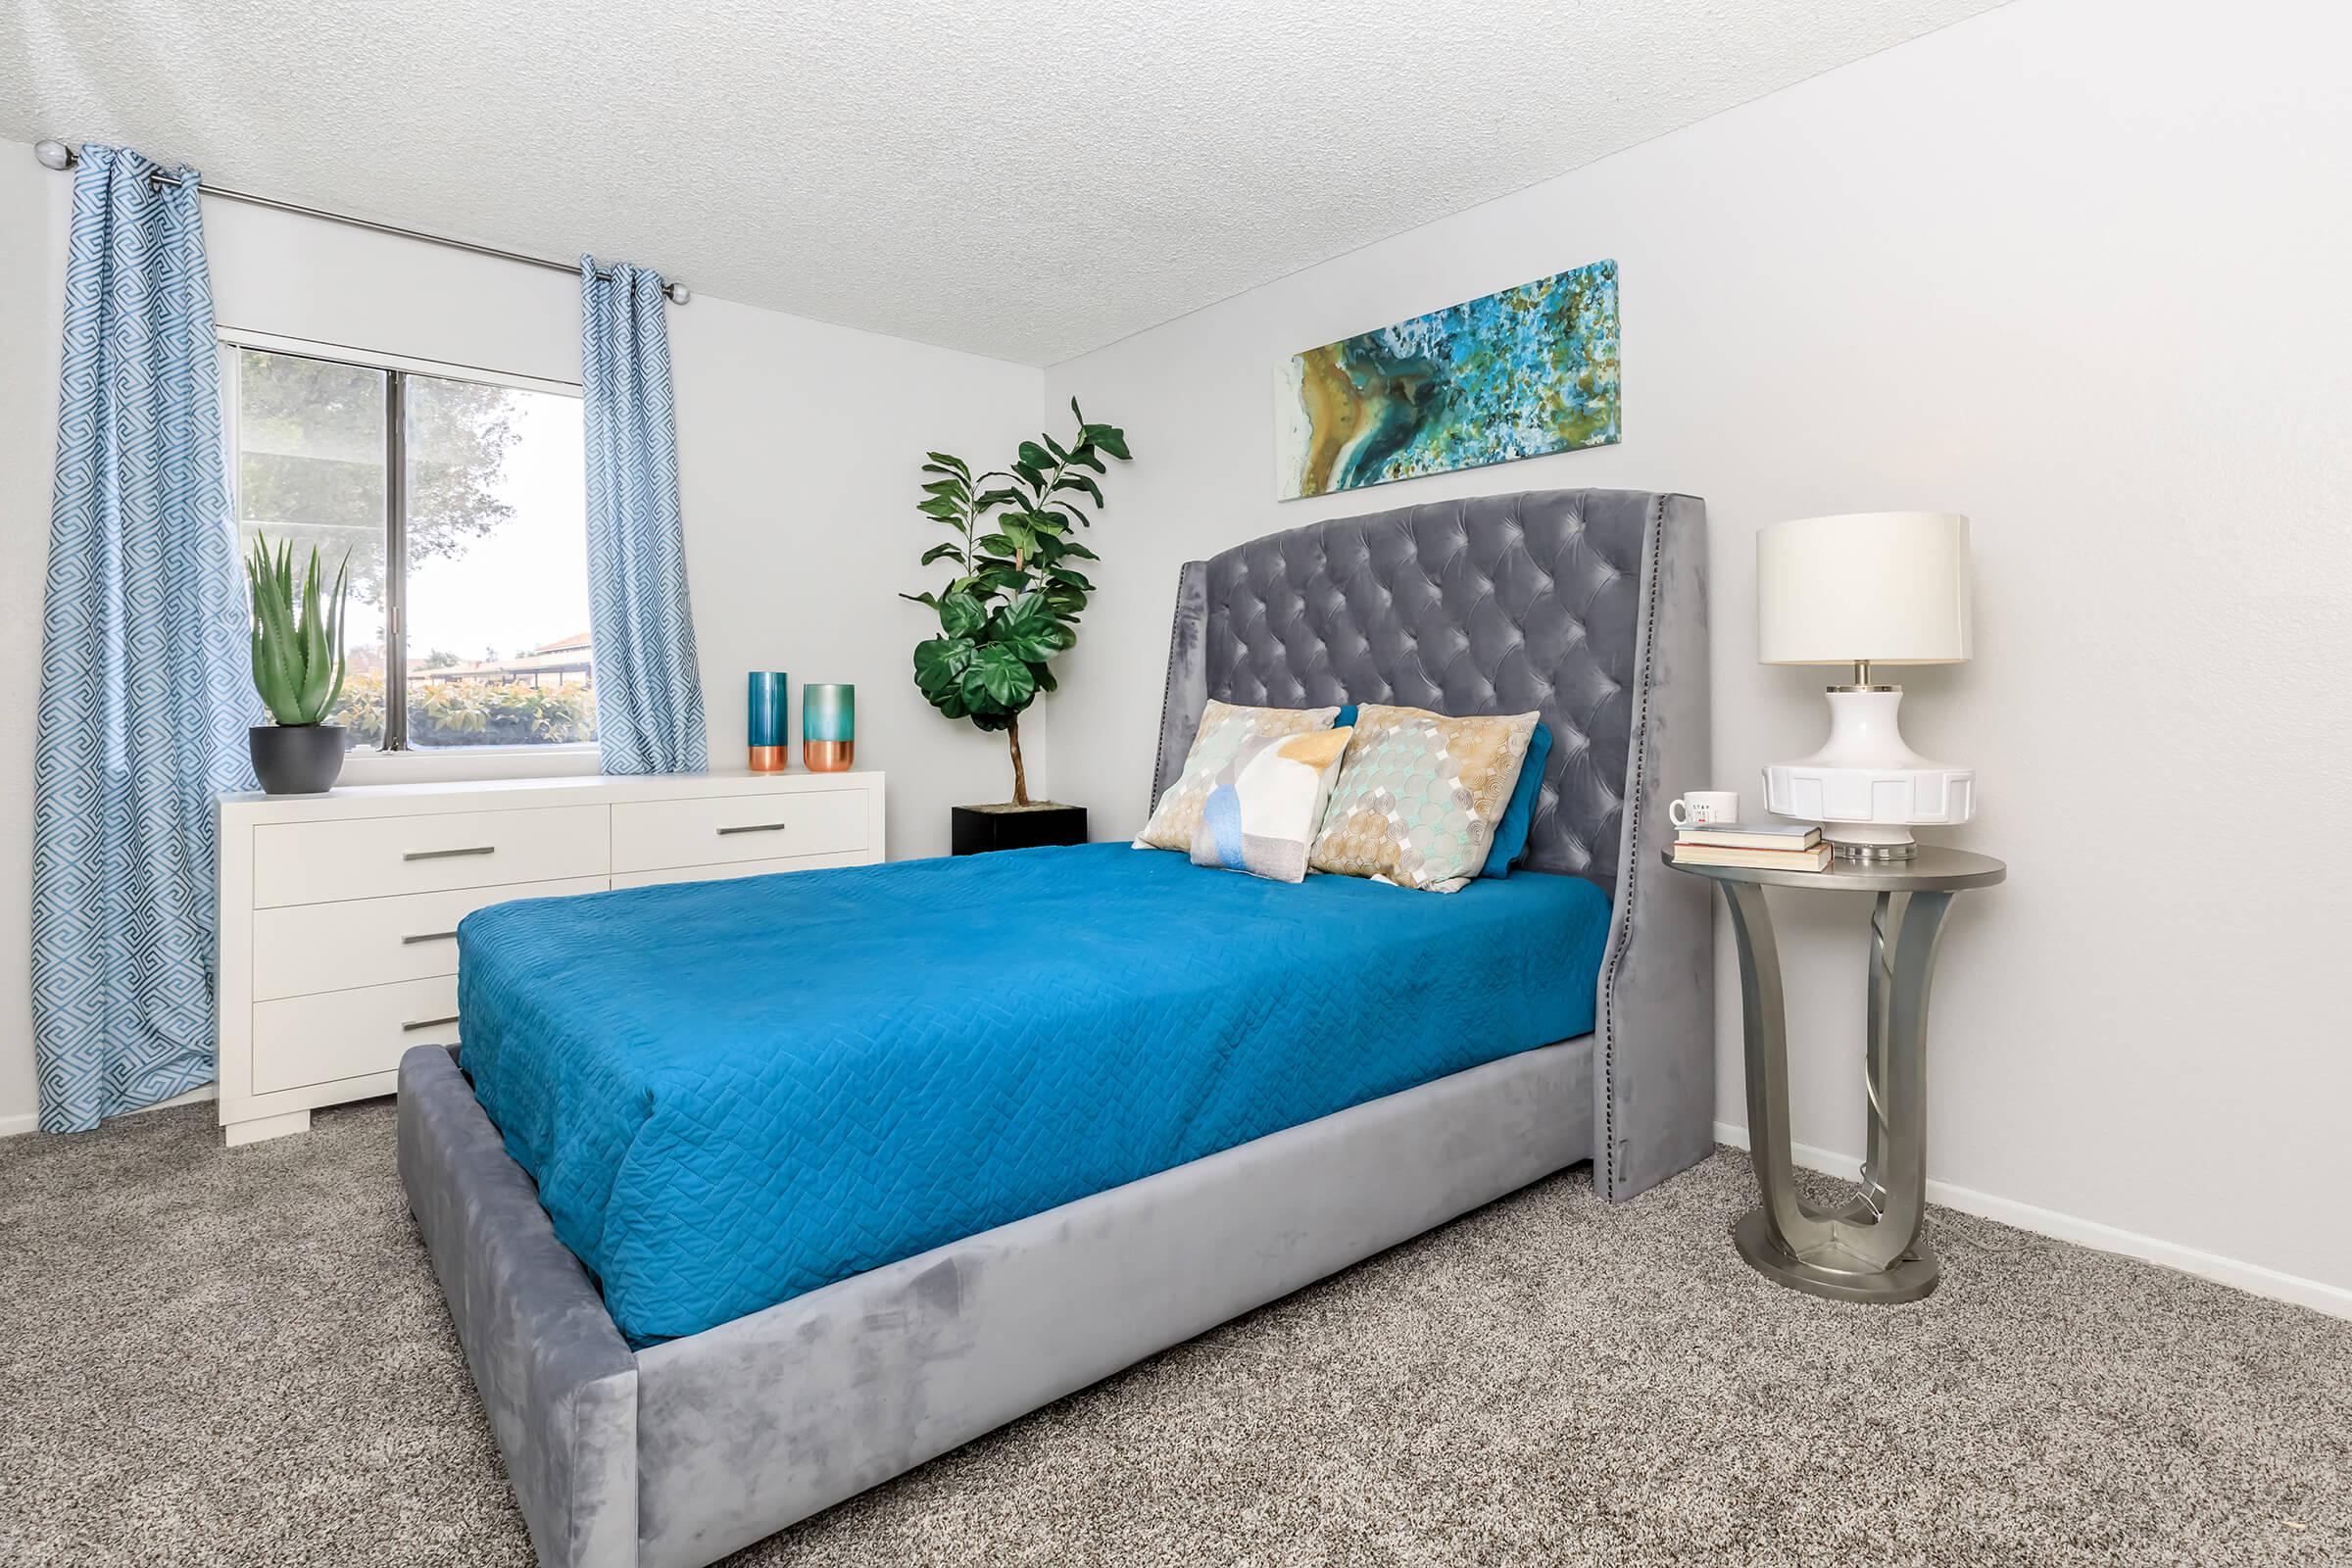 Furnished bedroom with blue sheets